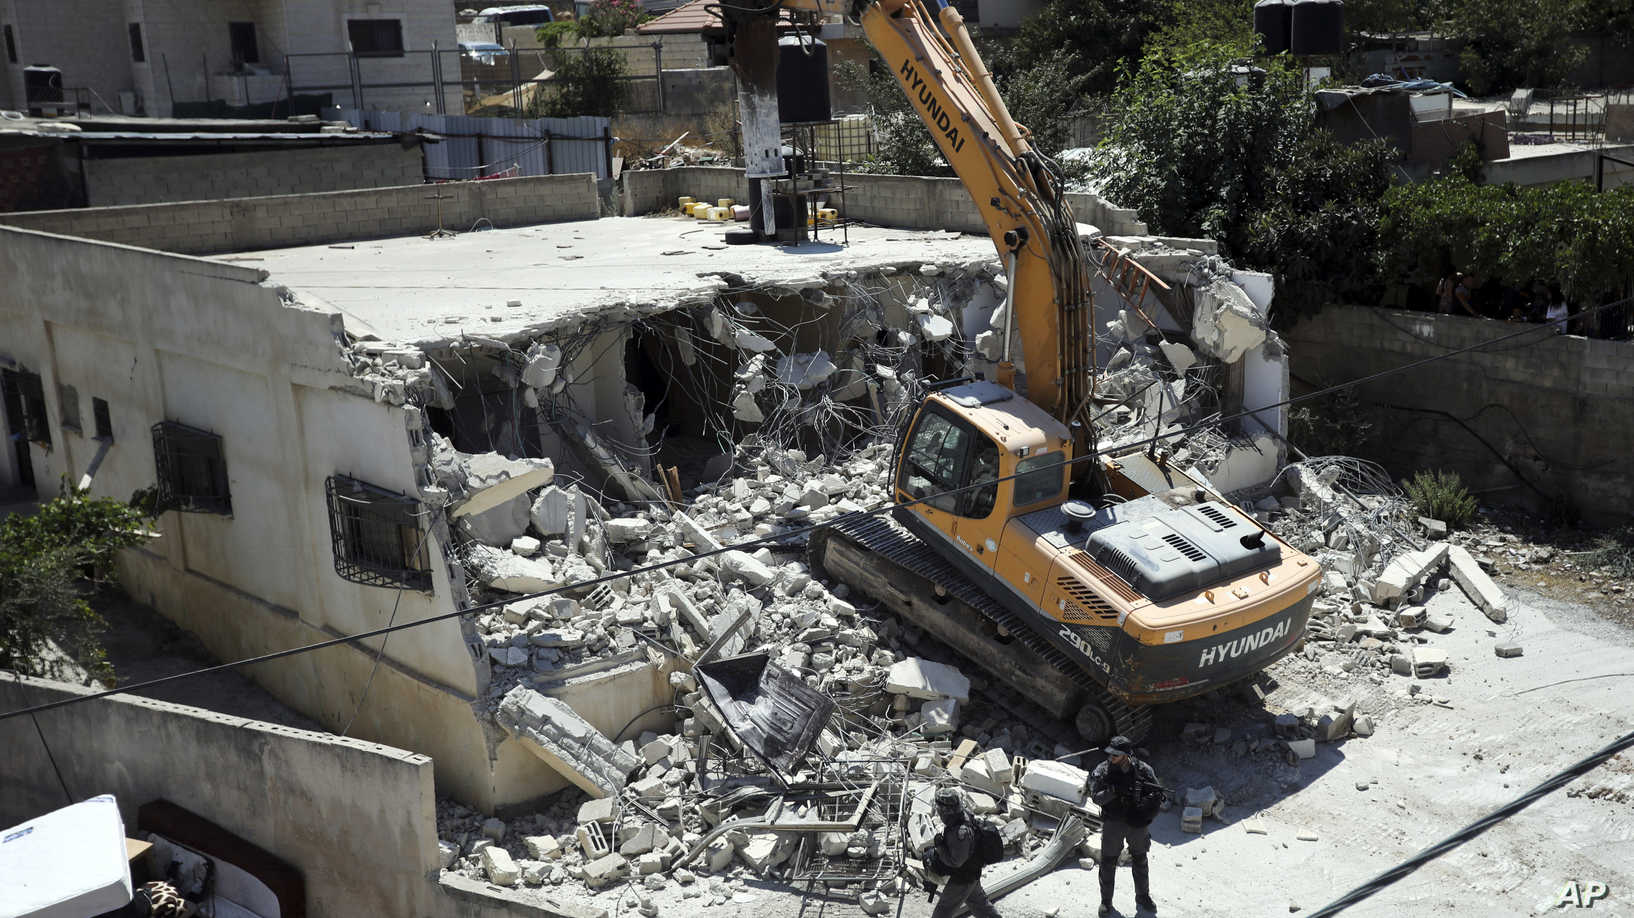 4 Palestinian Children Displaced as Israeli Forces Order Father to Demolish His Family Home